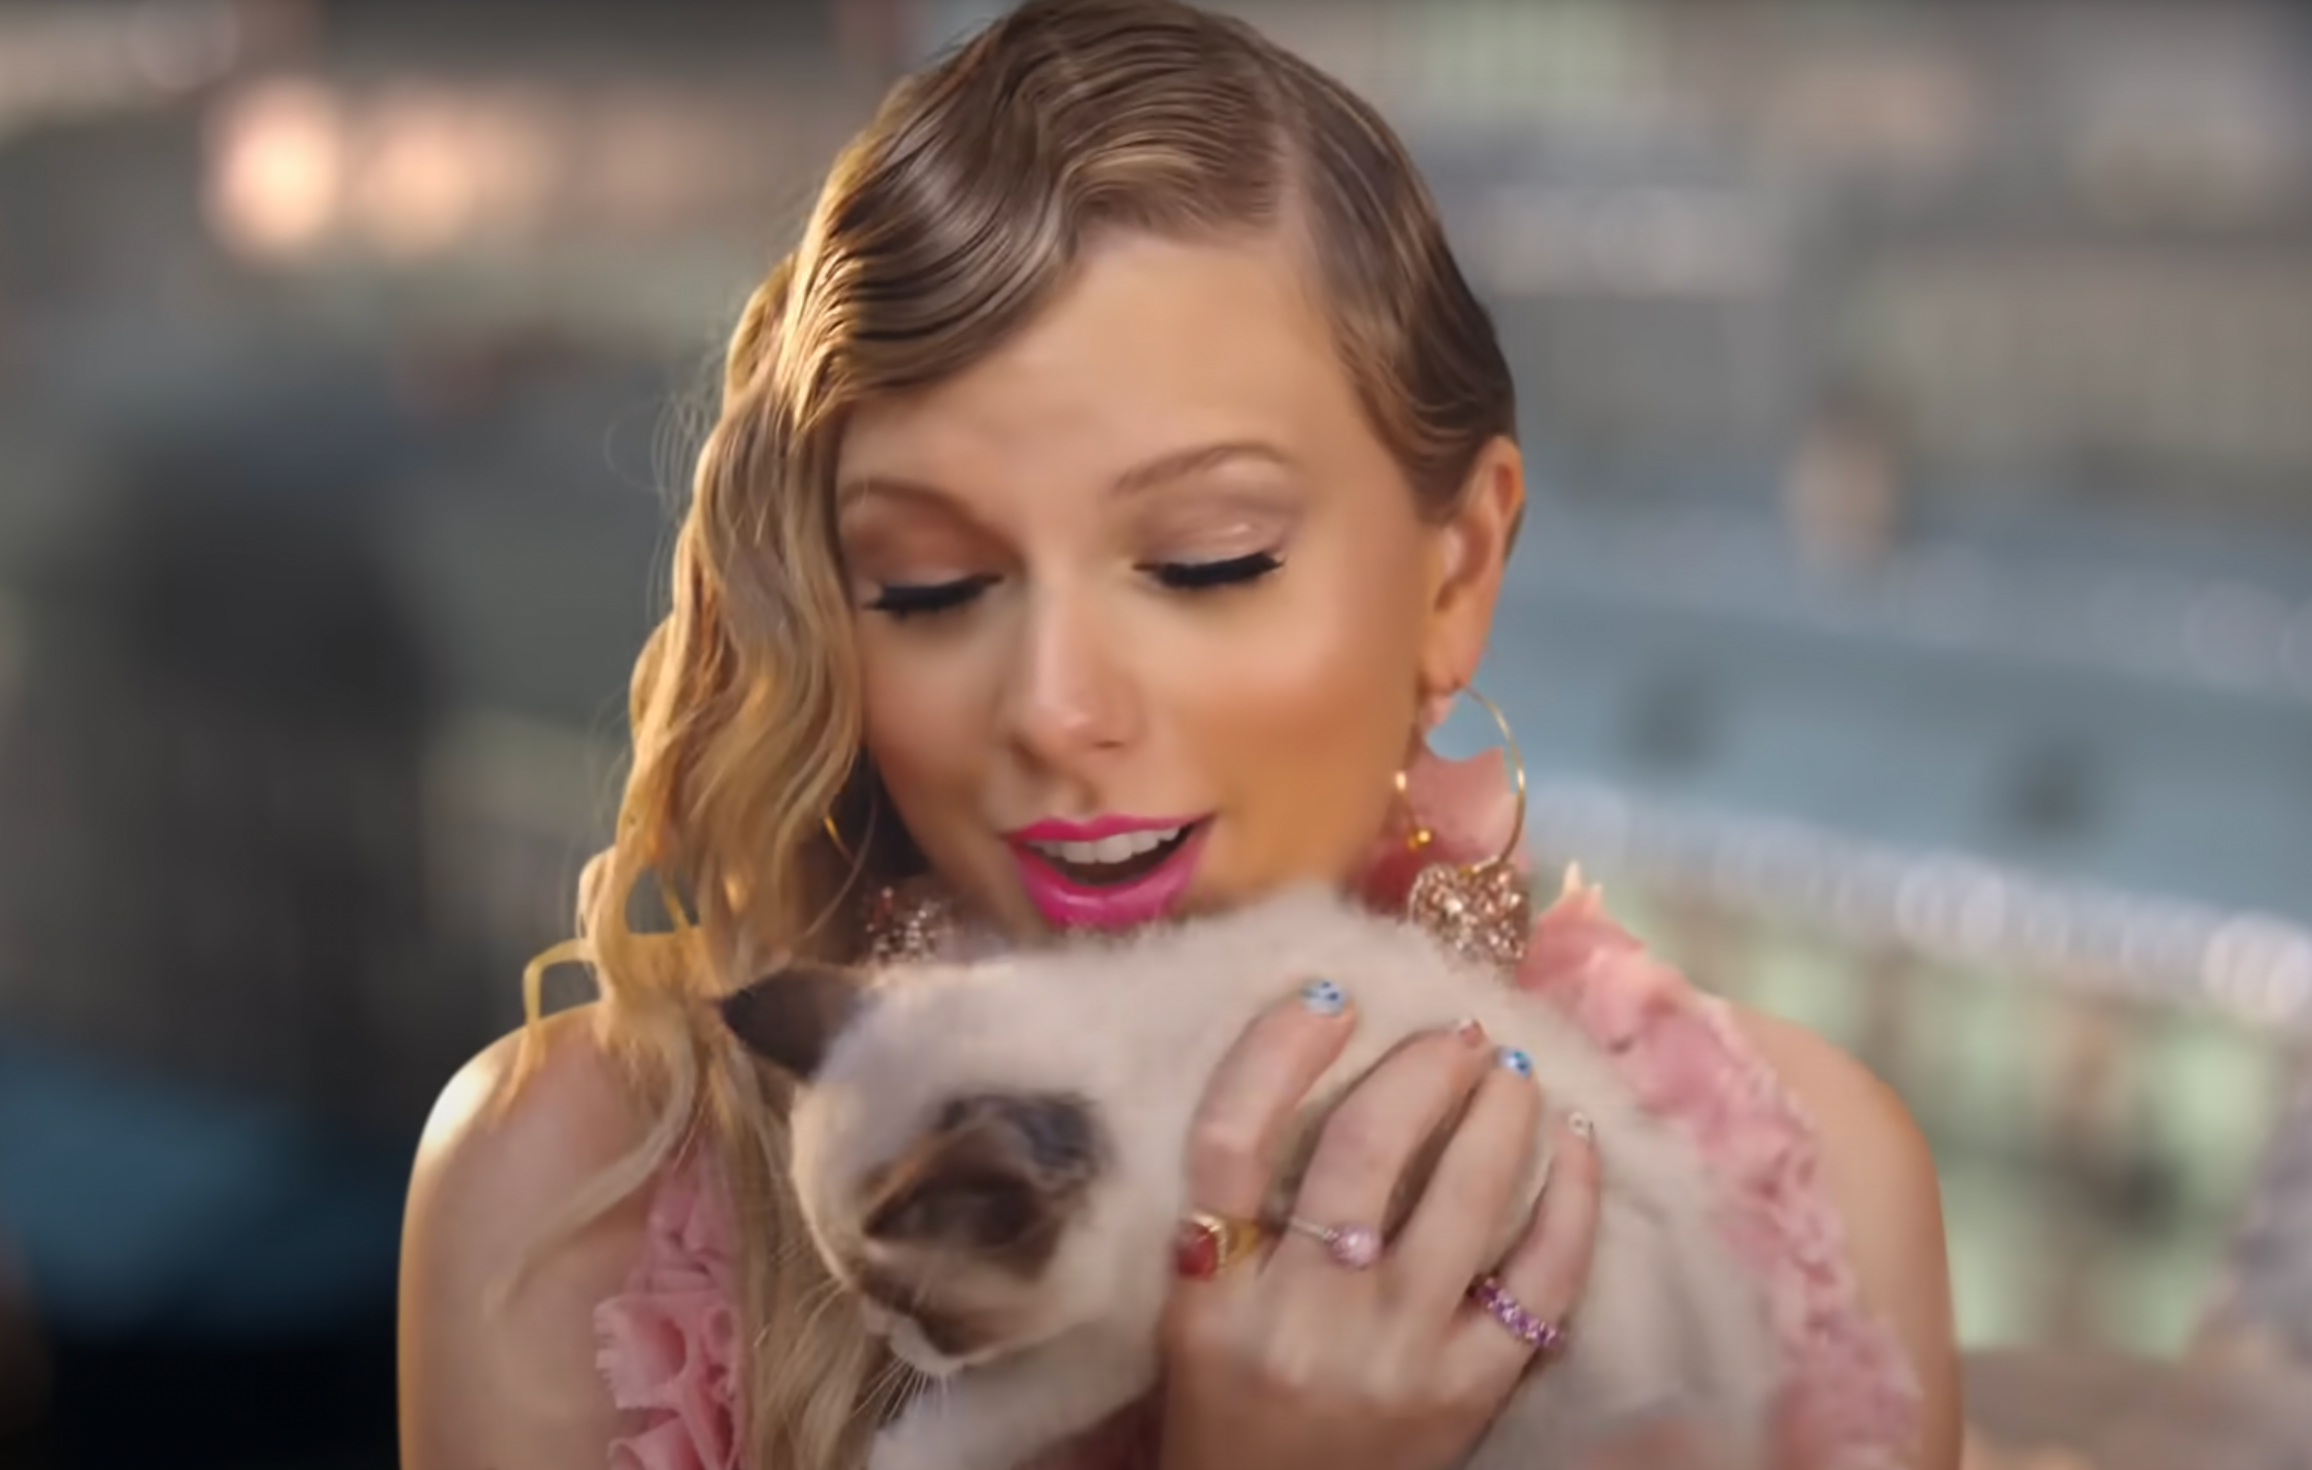 taylor swift and her cat benjamin button on the set of "ME!"